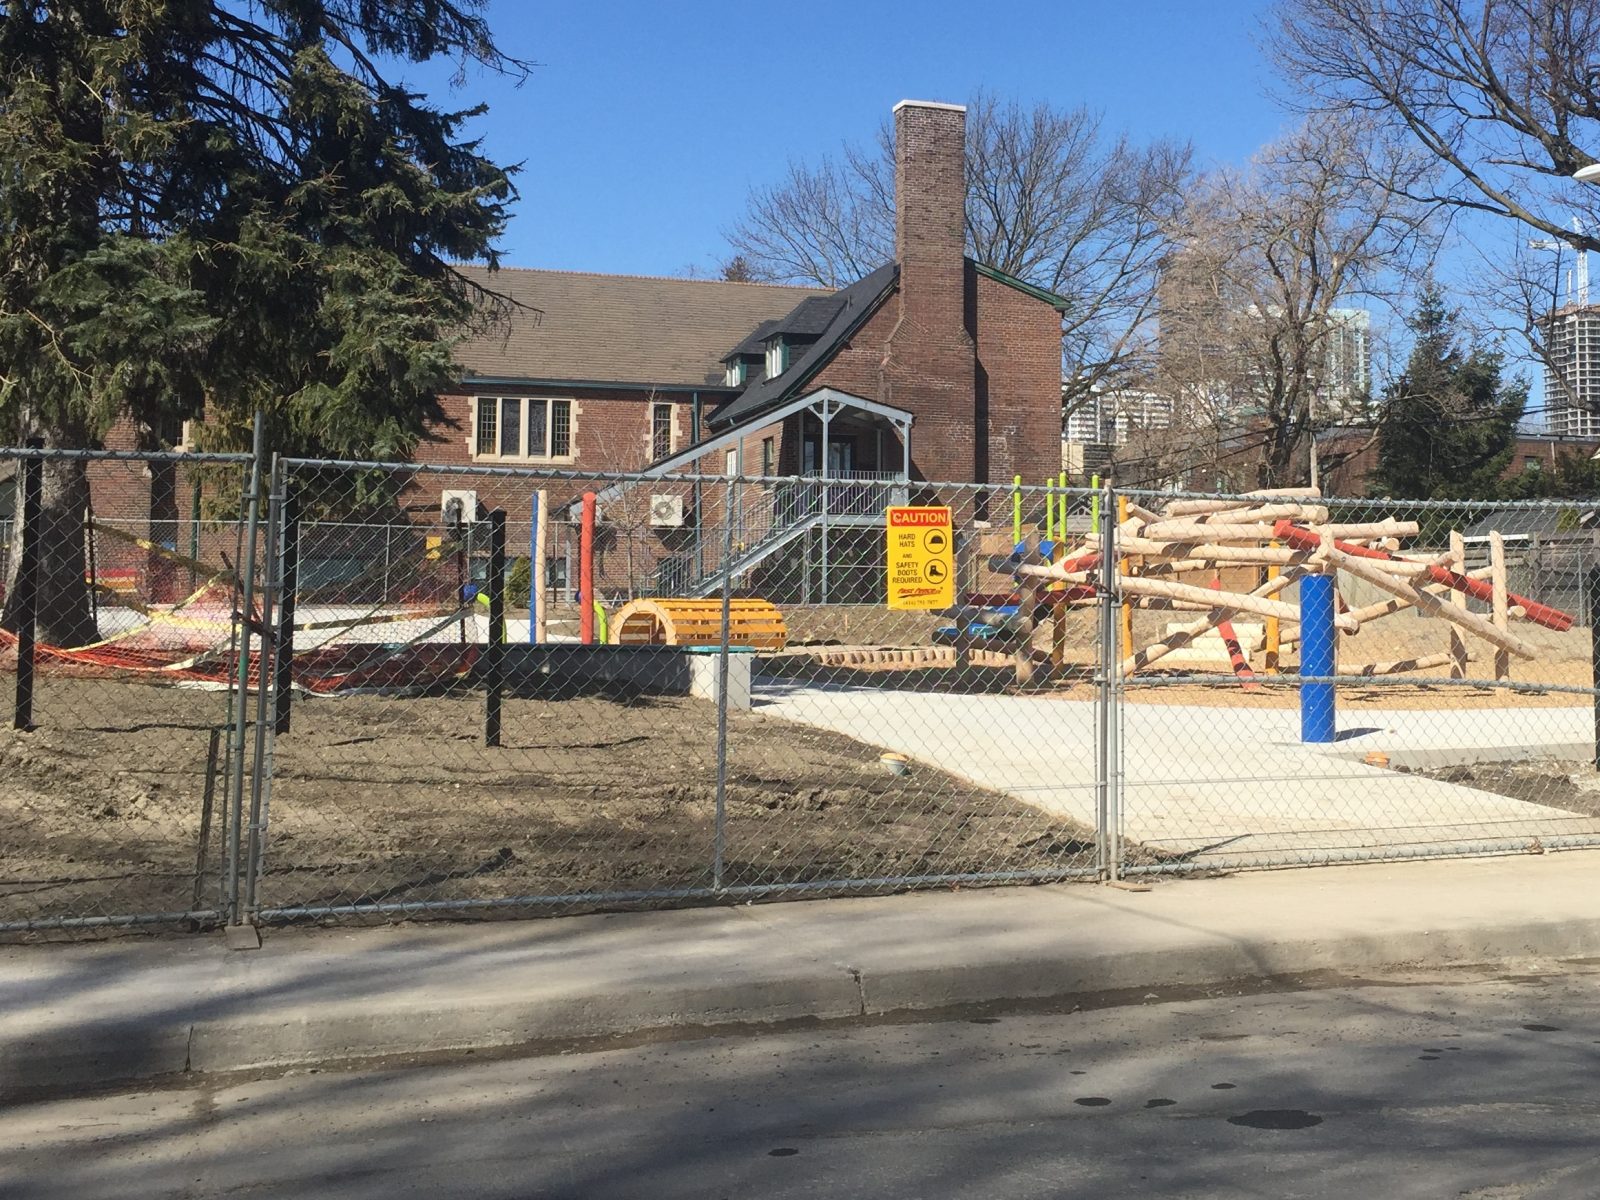 Temporary fence for playground construction